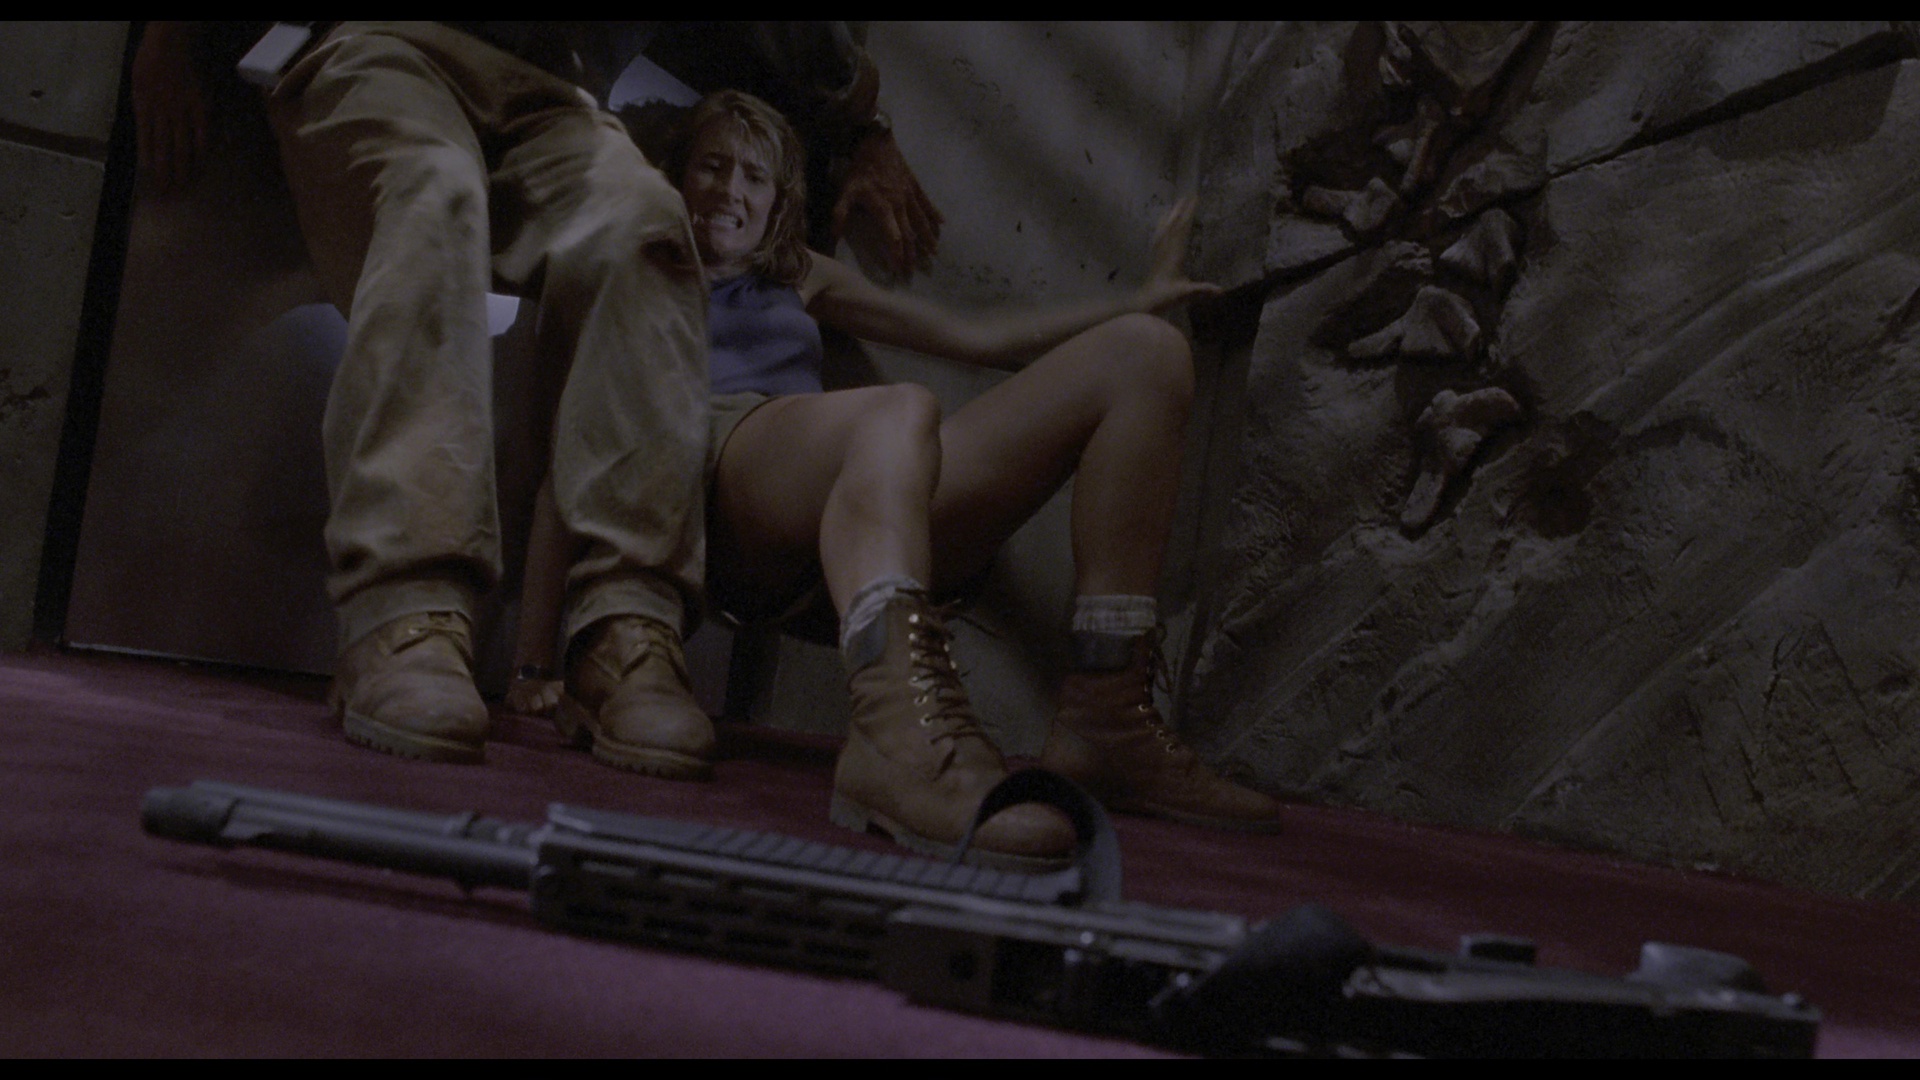 JURASSIC PARK (1993) - Dr. Alan Grant's (Sam Neill) Boots - Image 10 of 12